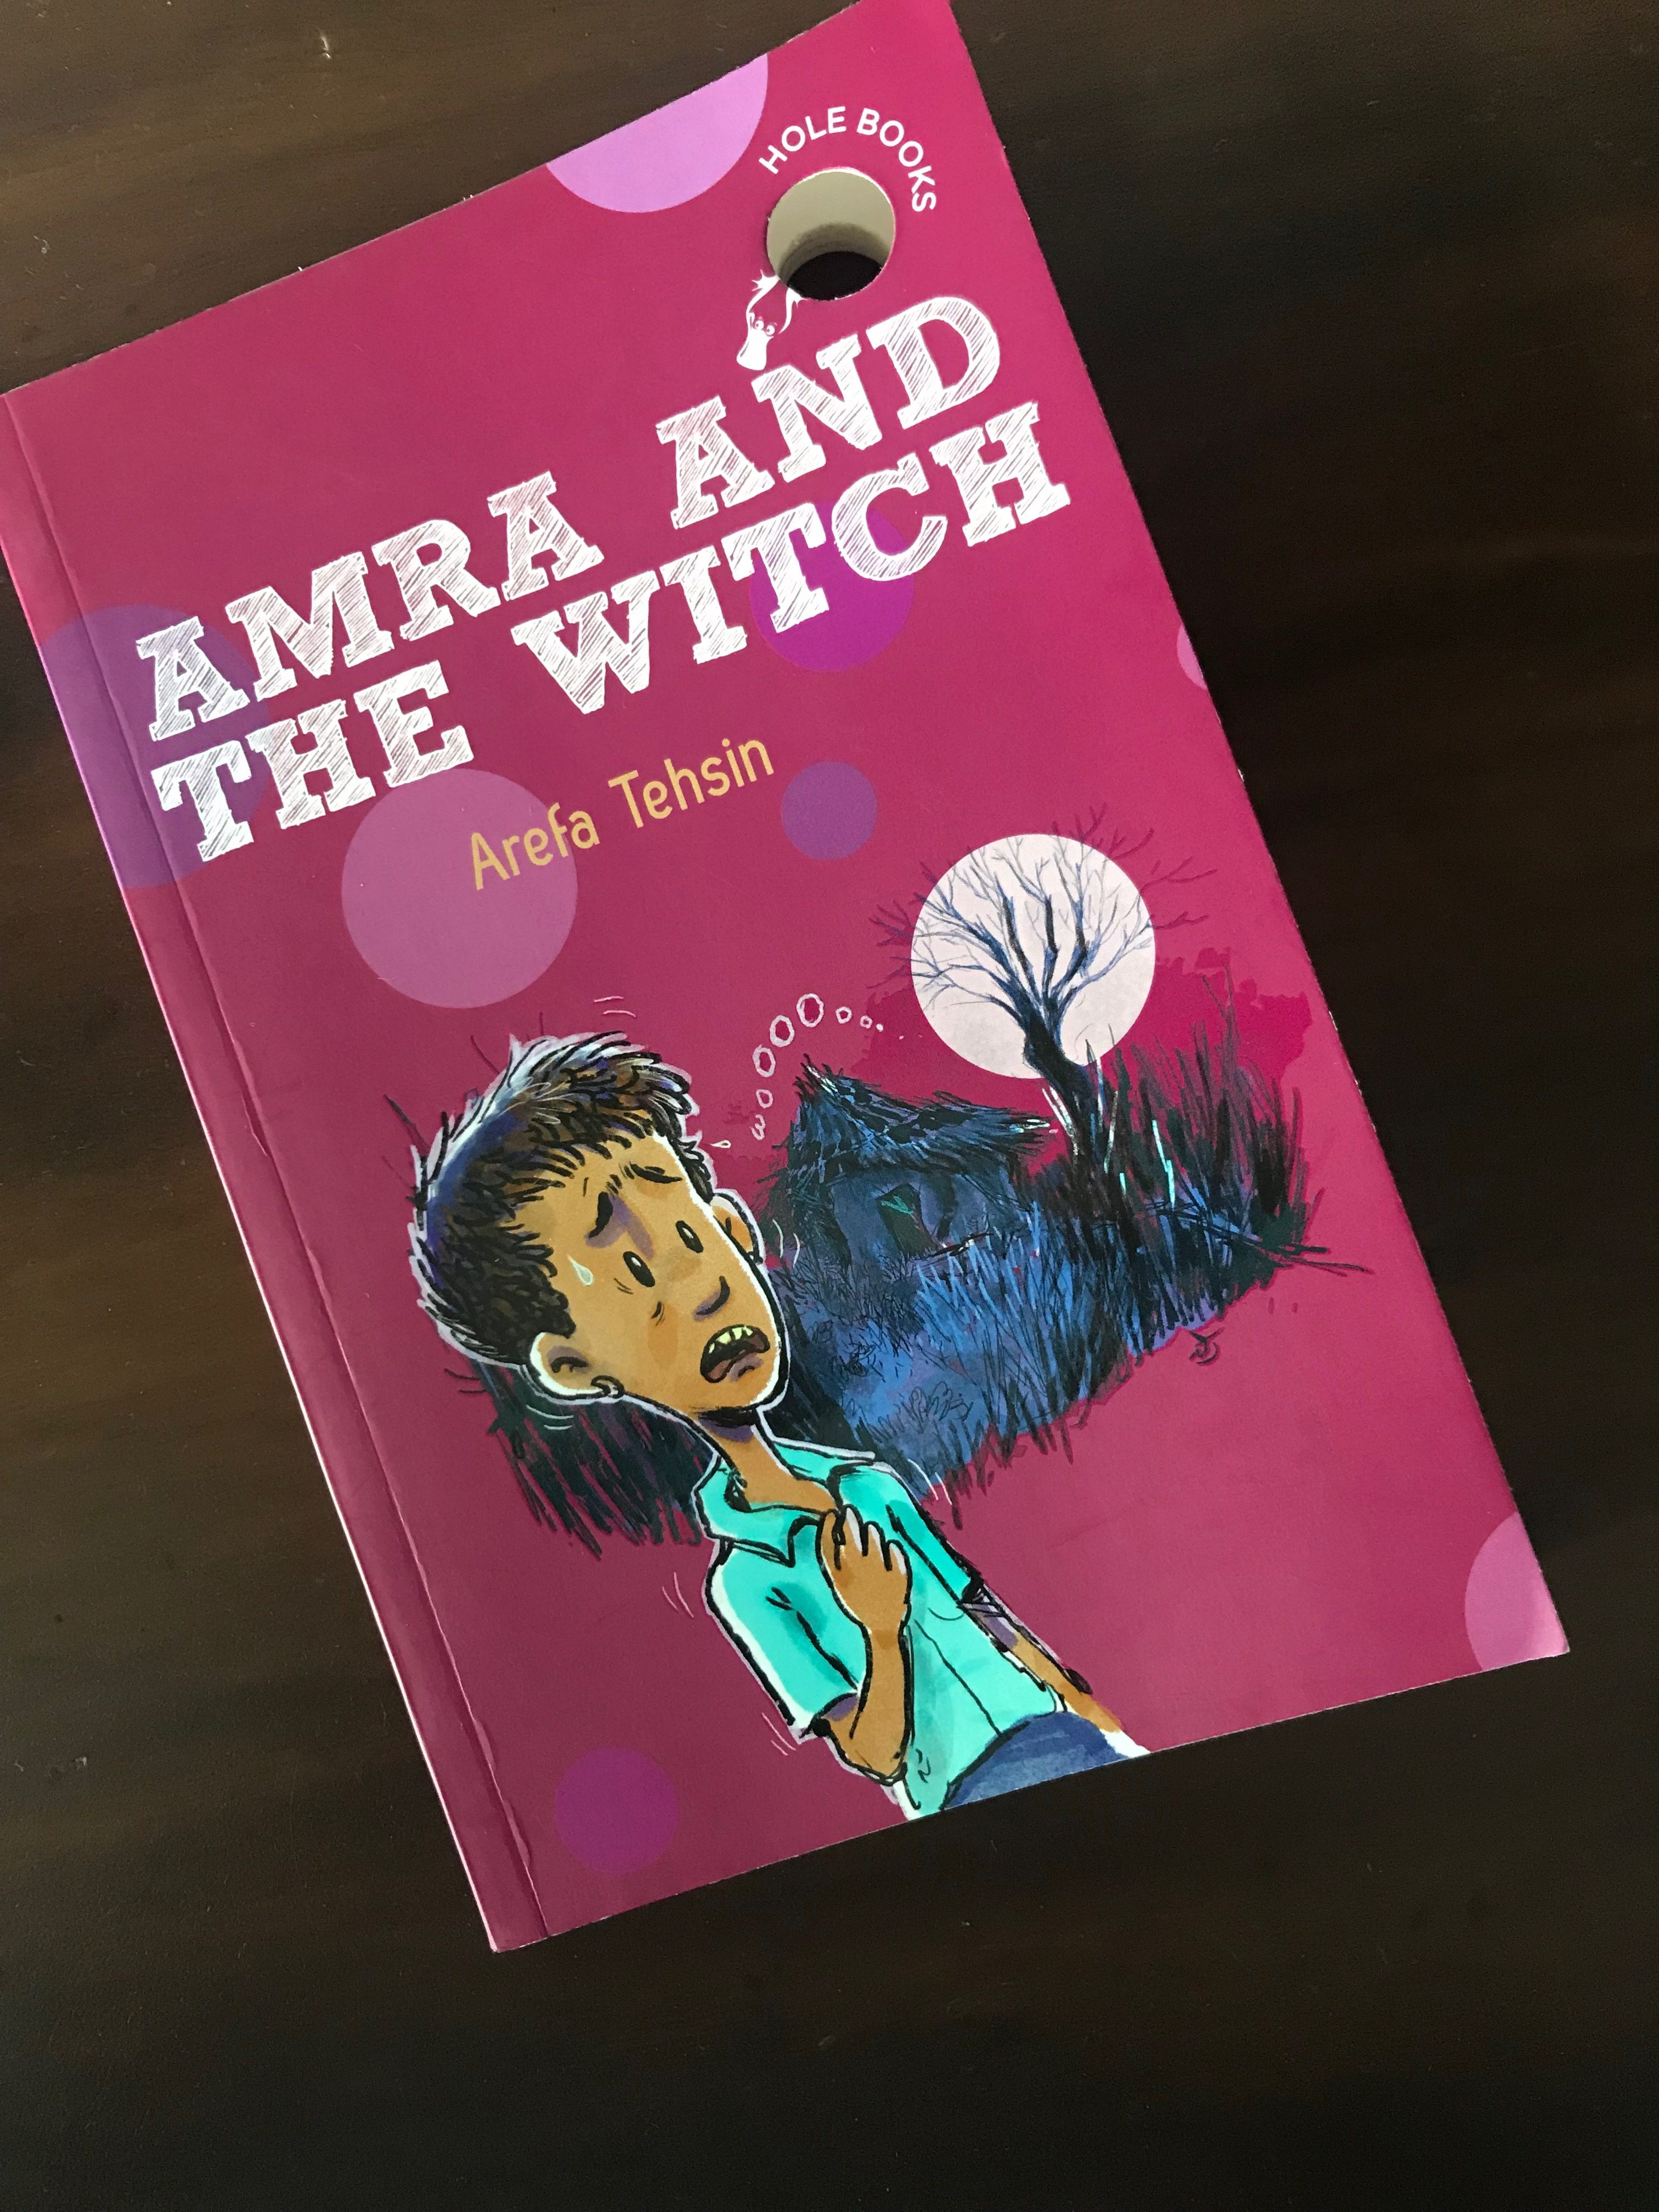 You are currently viewing Amra and the Witch by Arefa Tehsin – Go down the thrilling hOle book! 